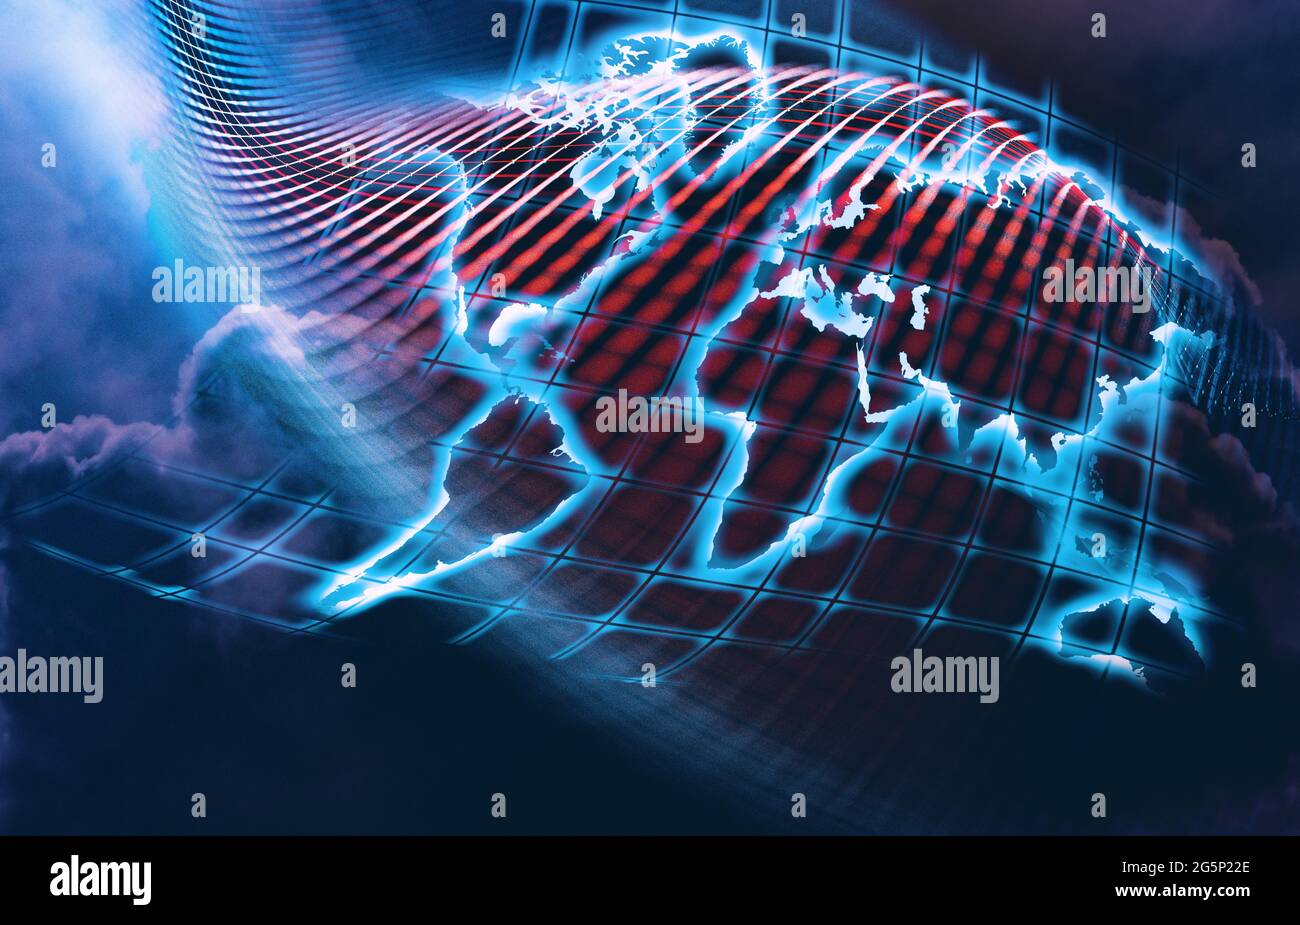 Cloud computing, internet, connectivity, digital communication and social networking.World map abstract internet connection Stock Photo